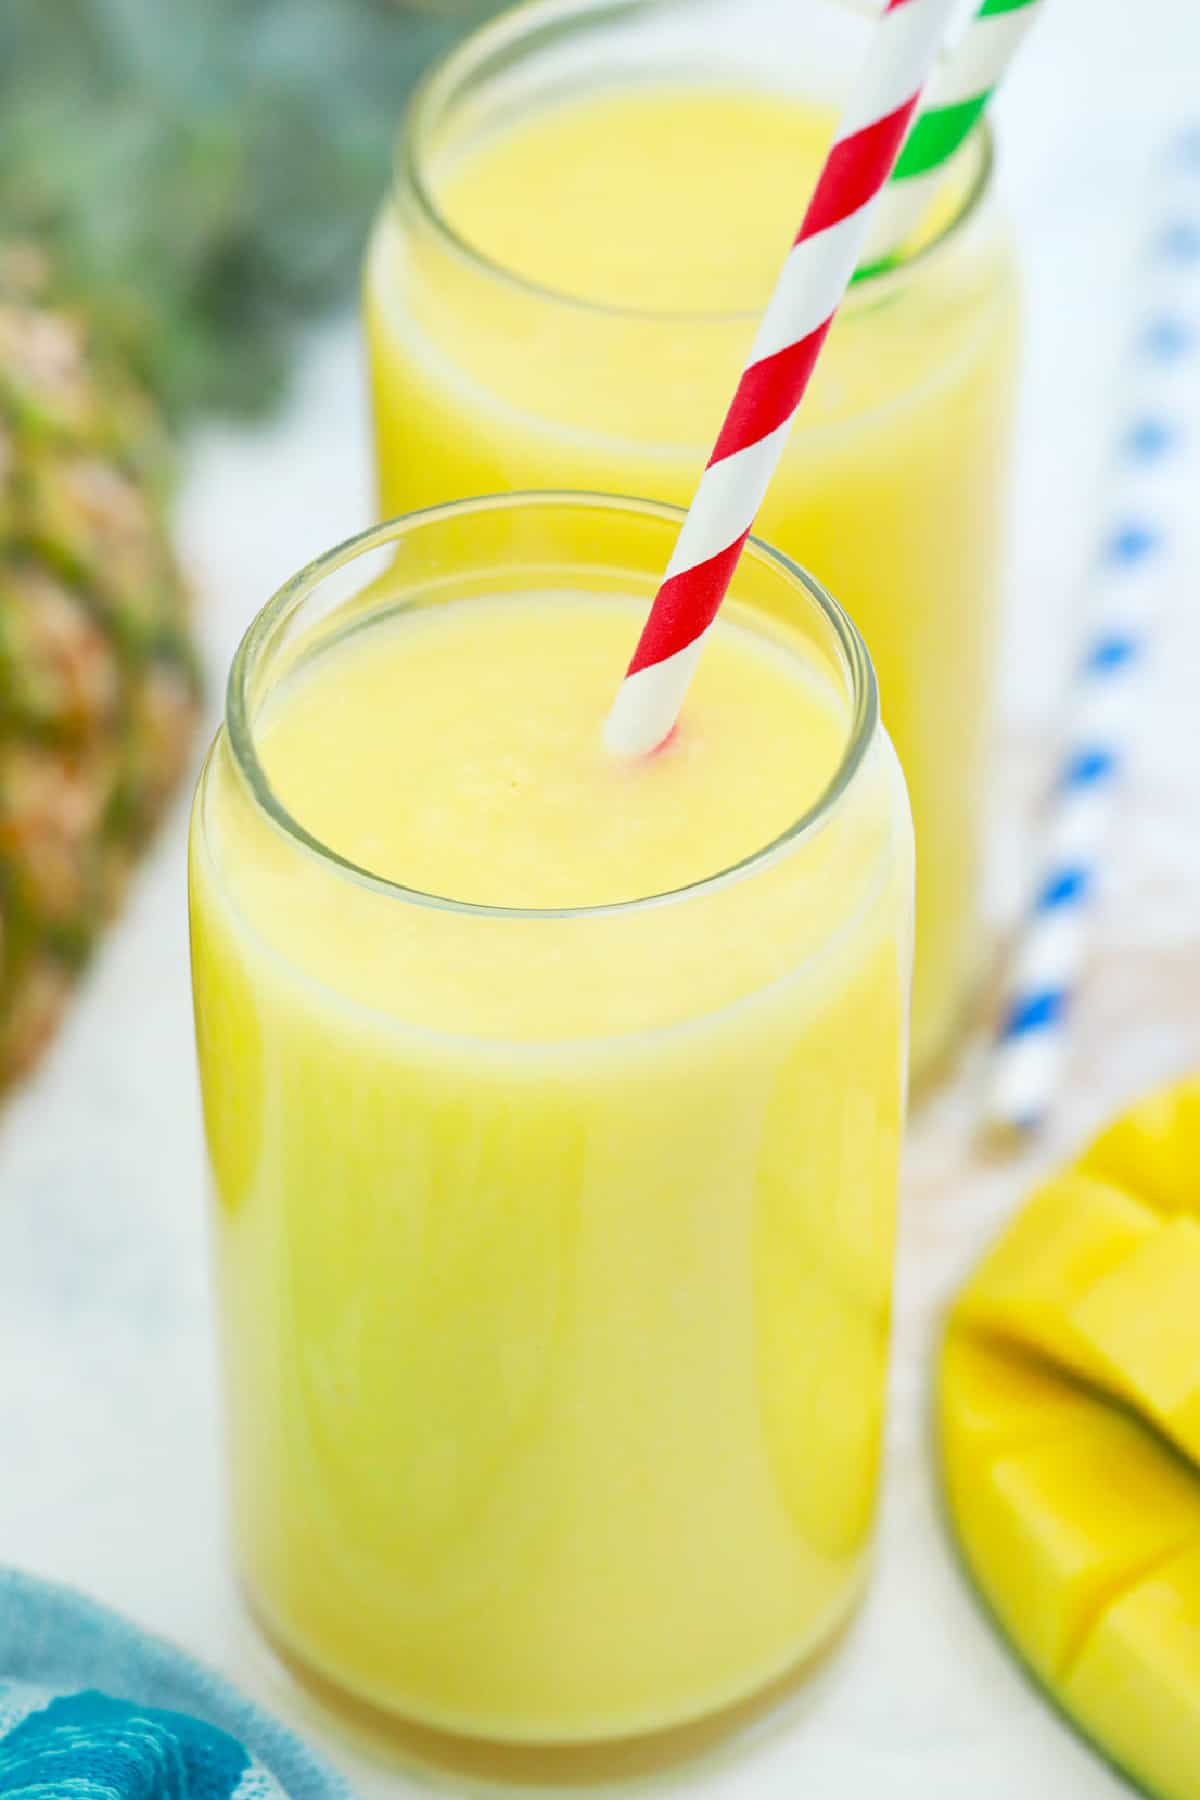 Mango Pineapple Smoothie in a glass with a straw.